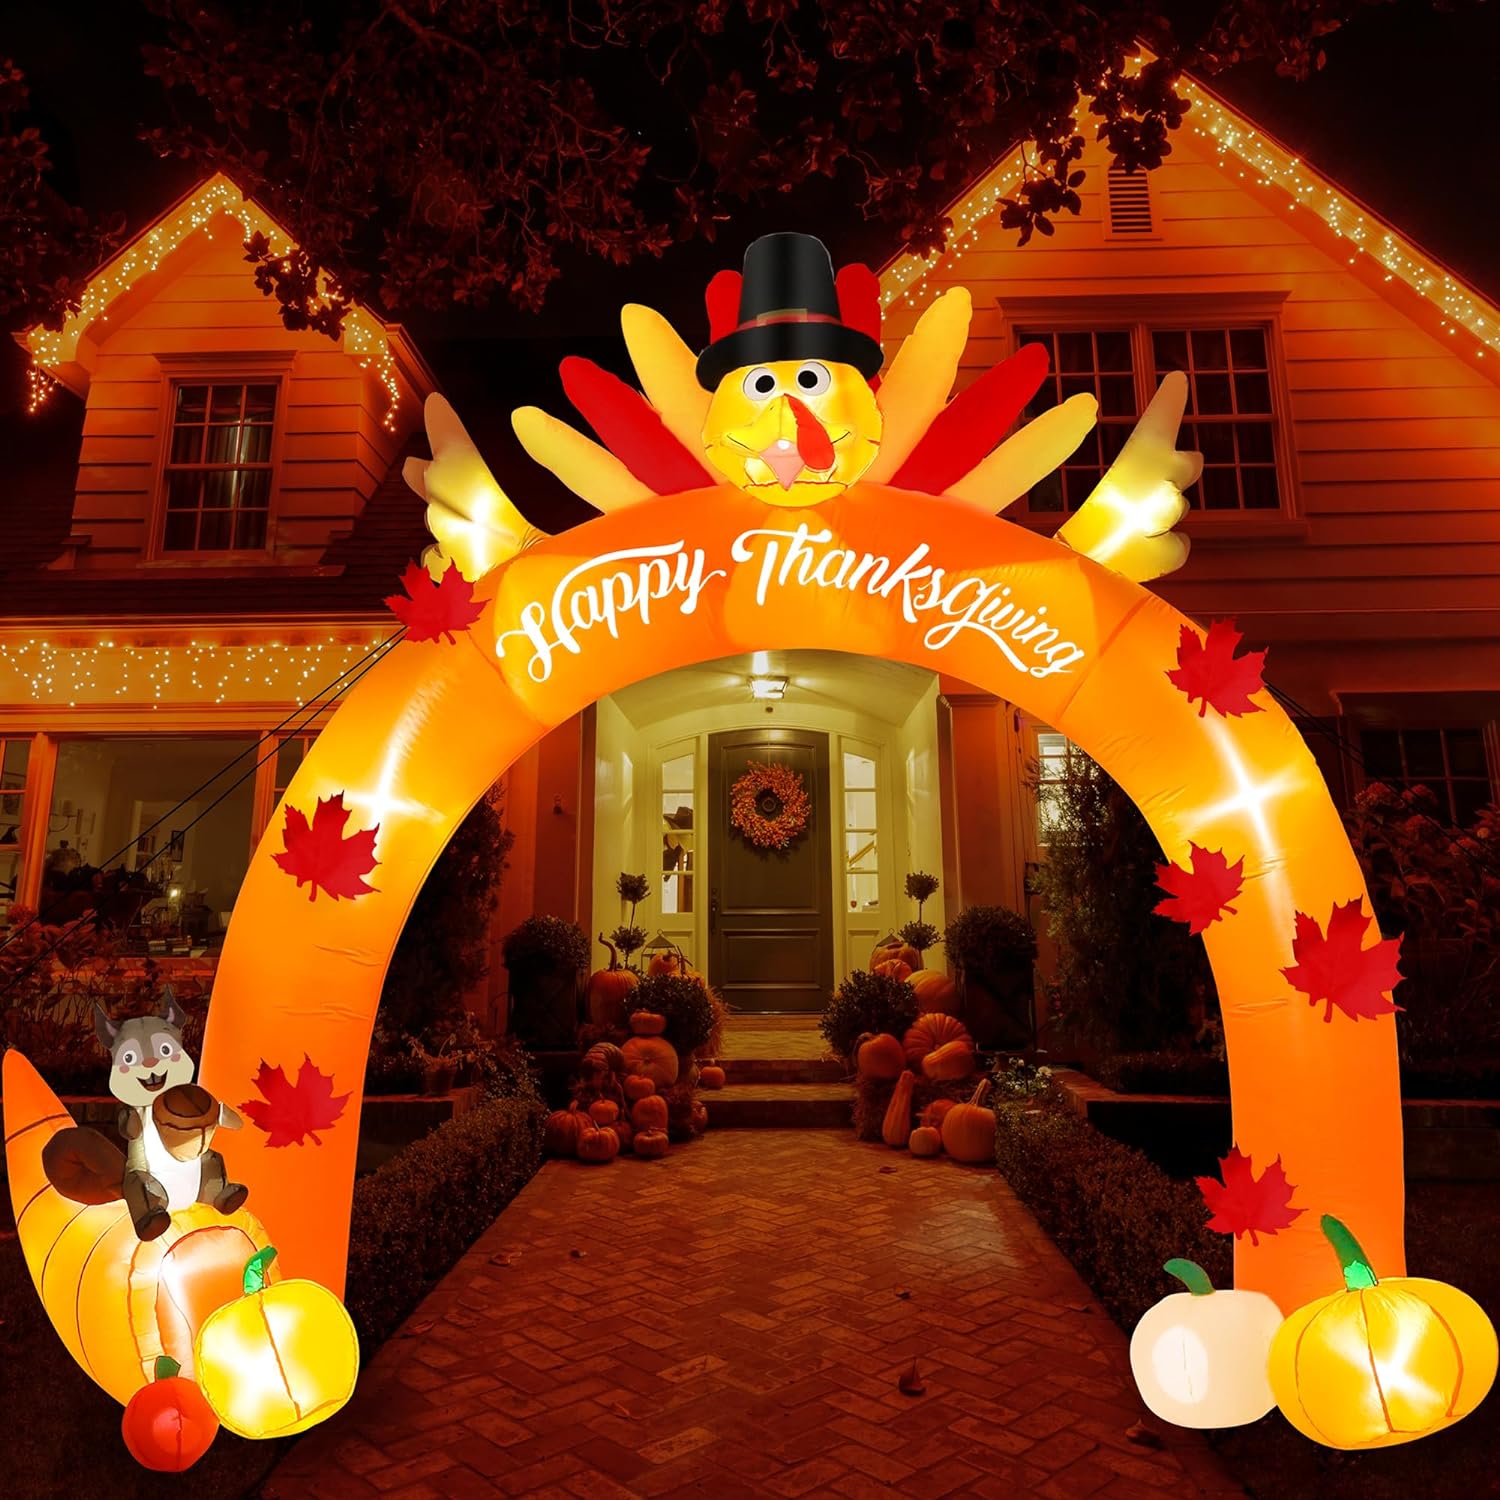 Thanksgiving Inflatable Decor 12FT Turkey Arch with Squirrel Pumpkins, Pre-lit Thanksgiving Blow Up Yard Decorations